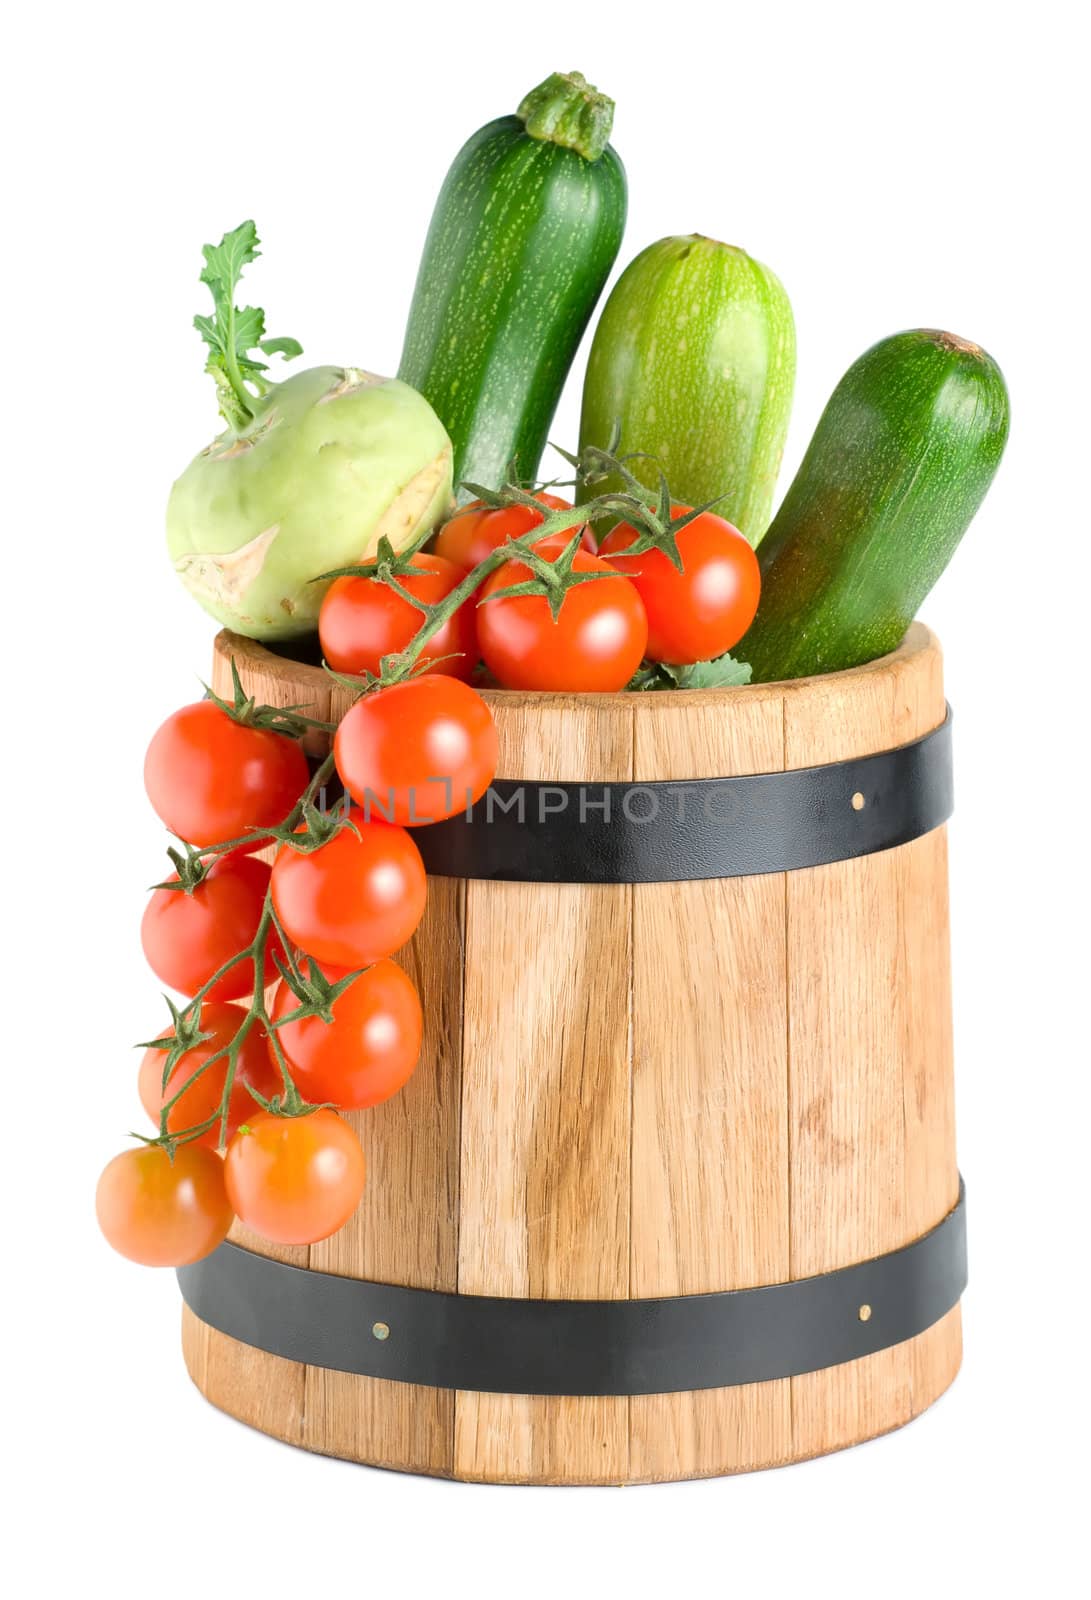 Wooden barrel with vegetables isolated on a white background